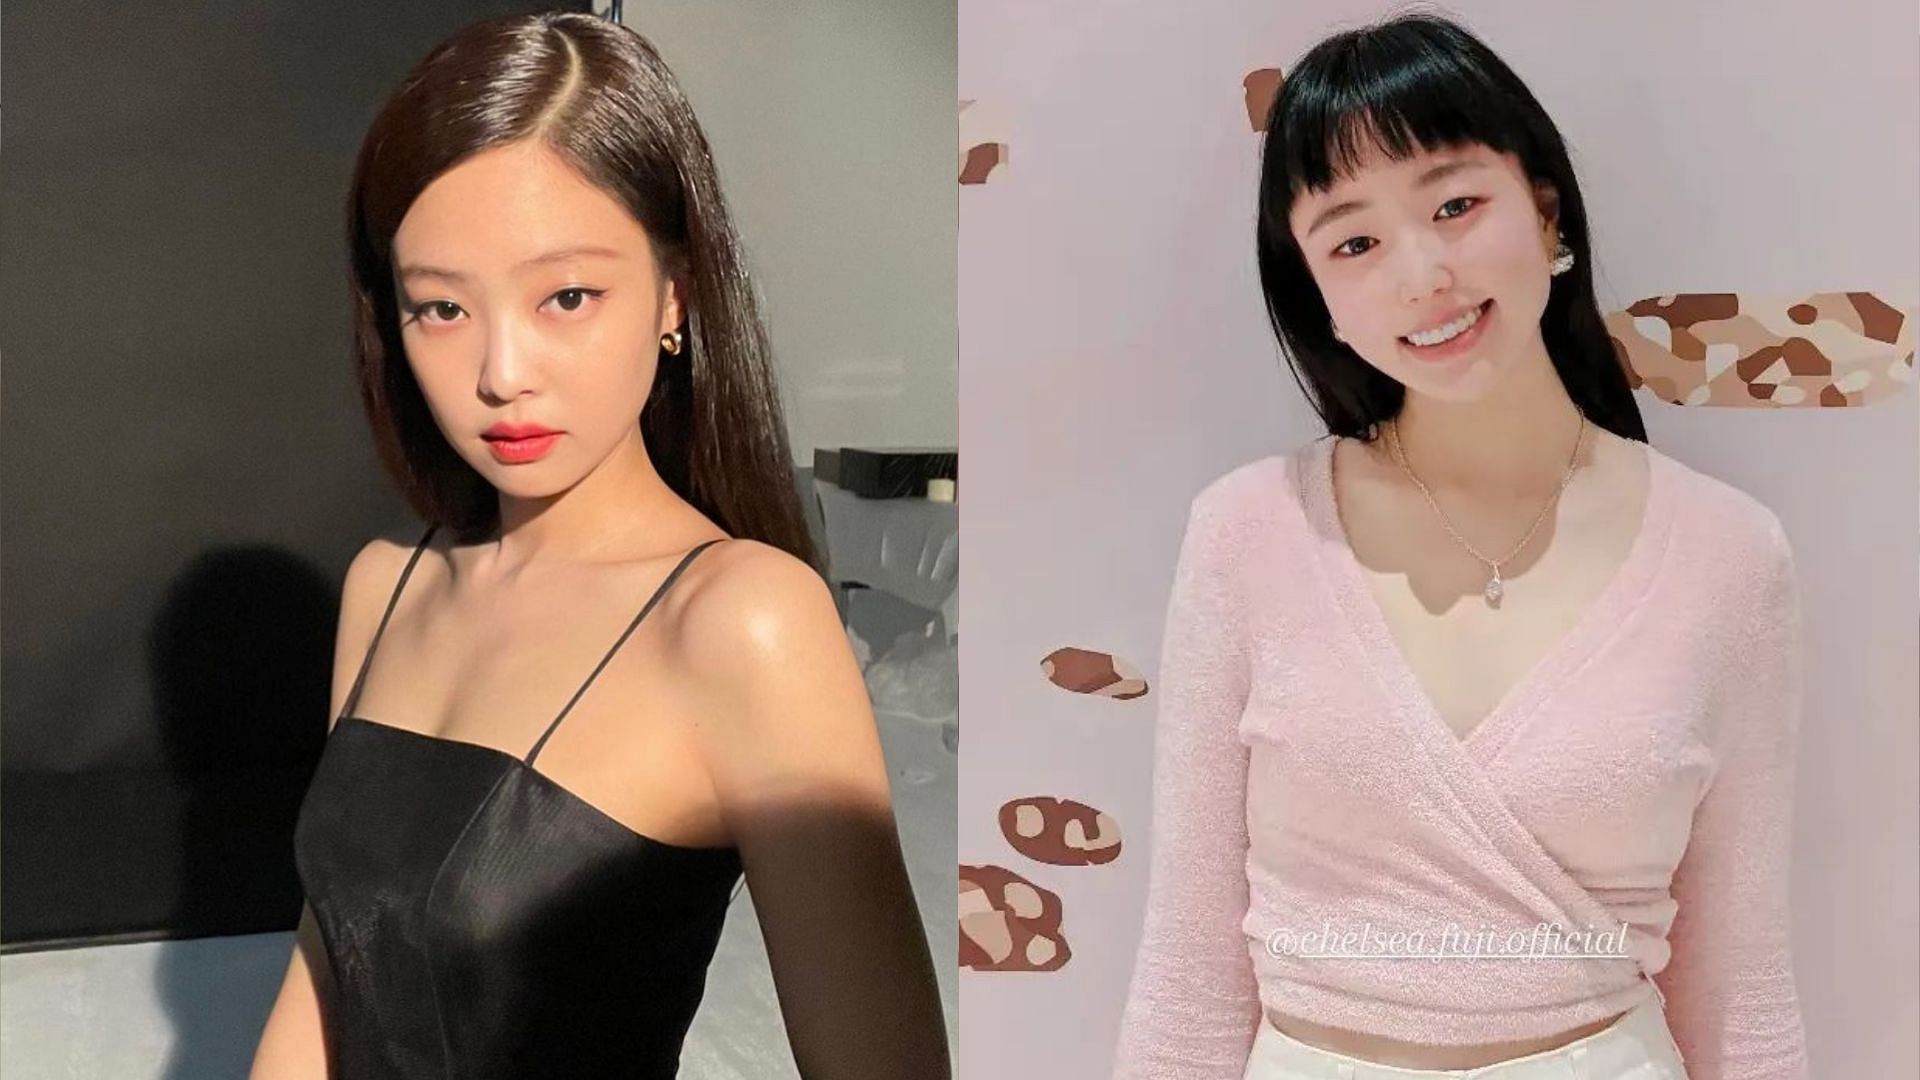 BLACKPINK&#039;s Jennie and her body double/dancer Chelsea Fuji (Images via Instagram/jennierubjane and chelsea.fuji.official)